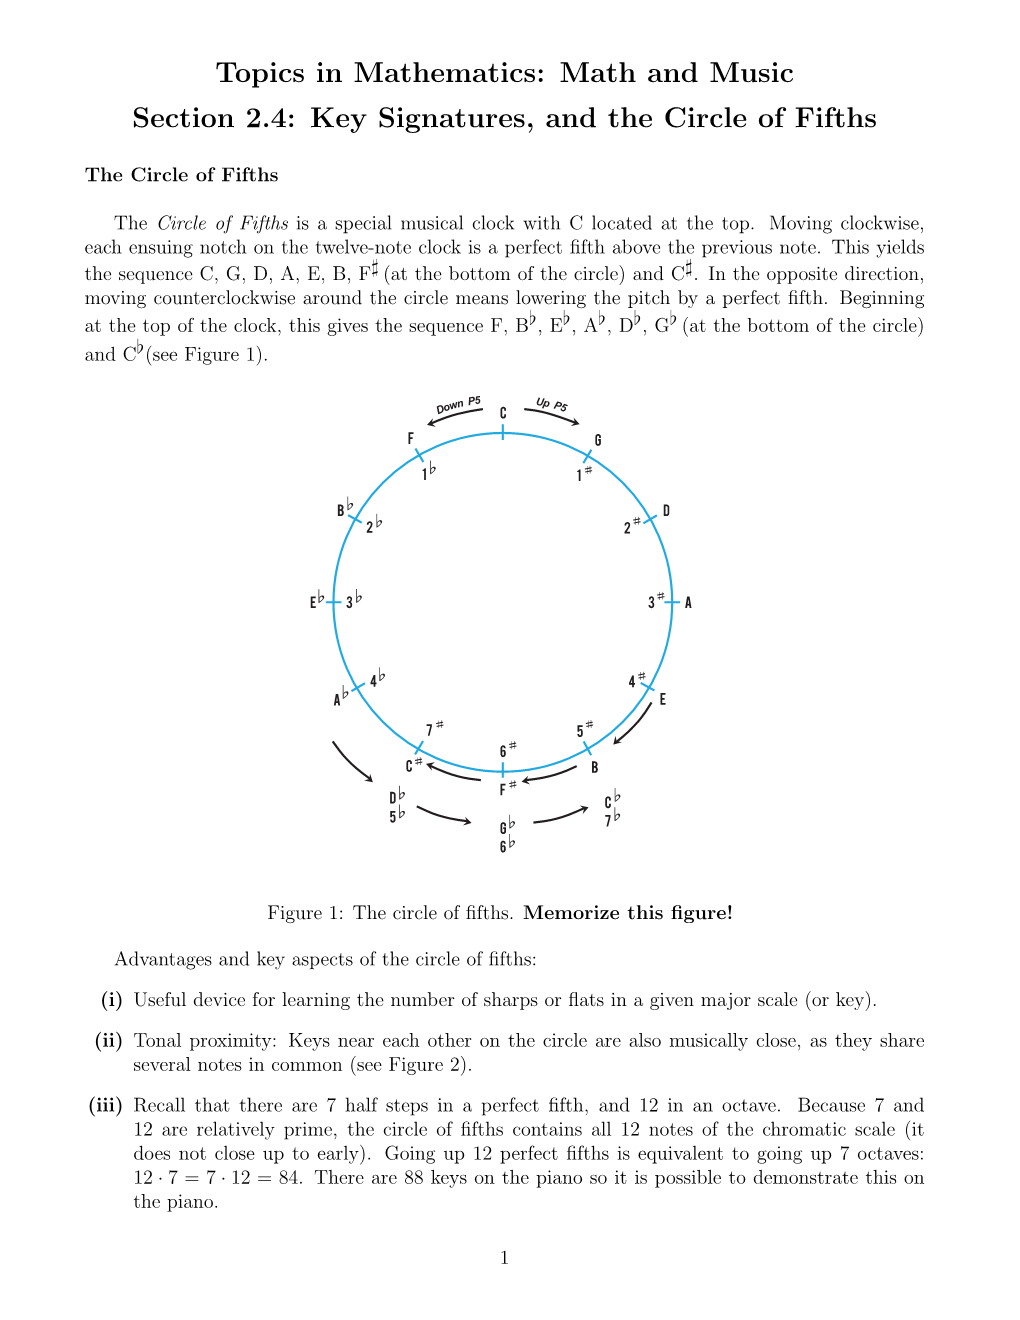 Math and Music Section 2.4: Key Signatures, and the Circle of Fifths